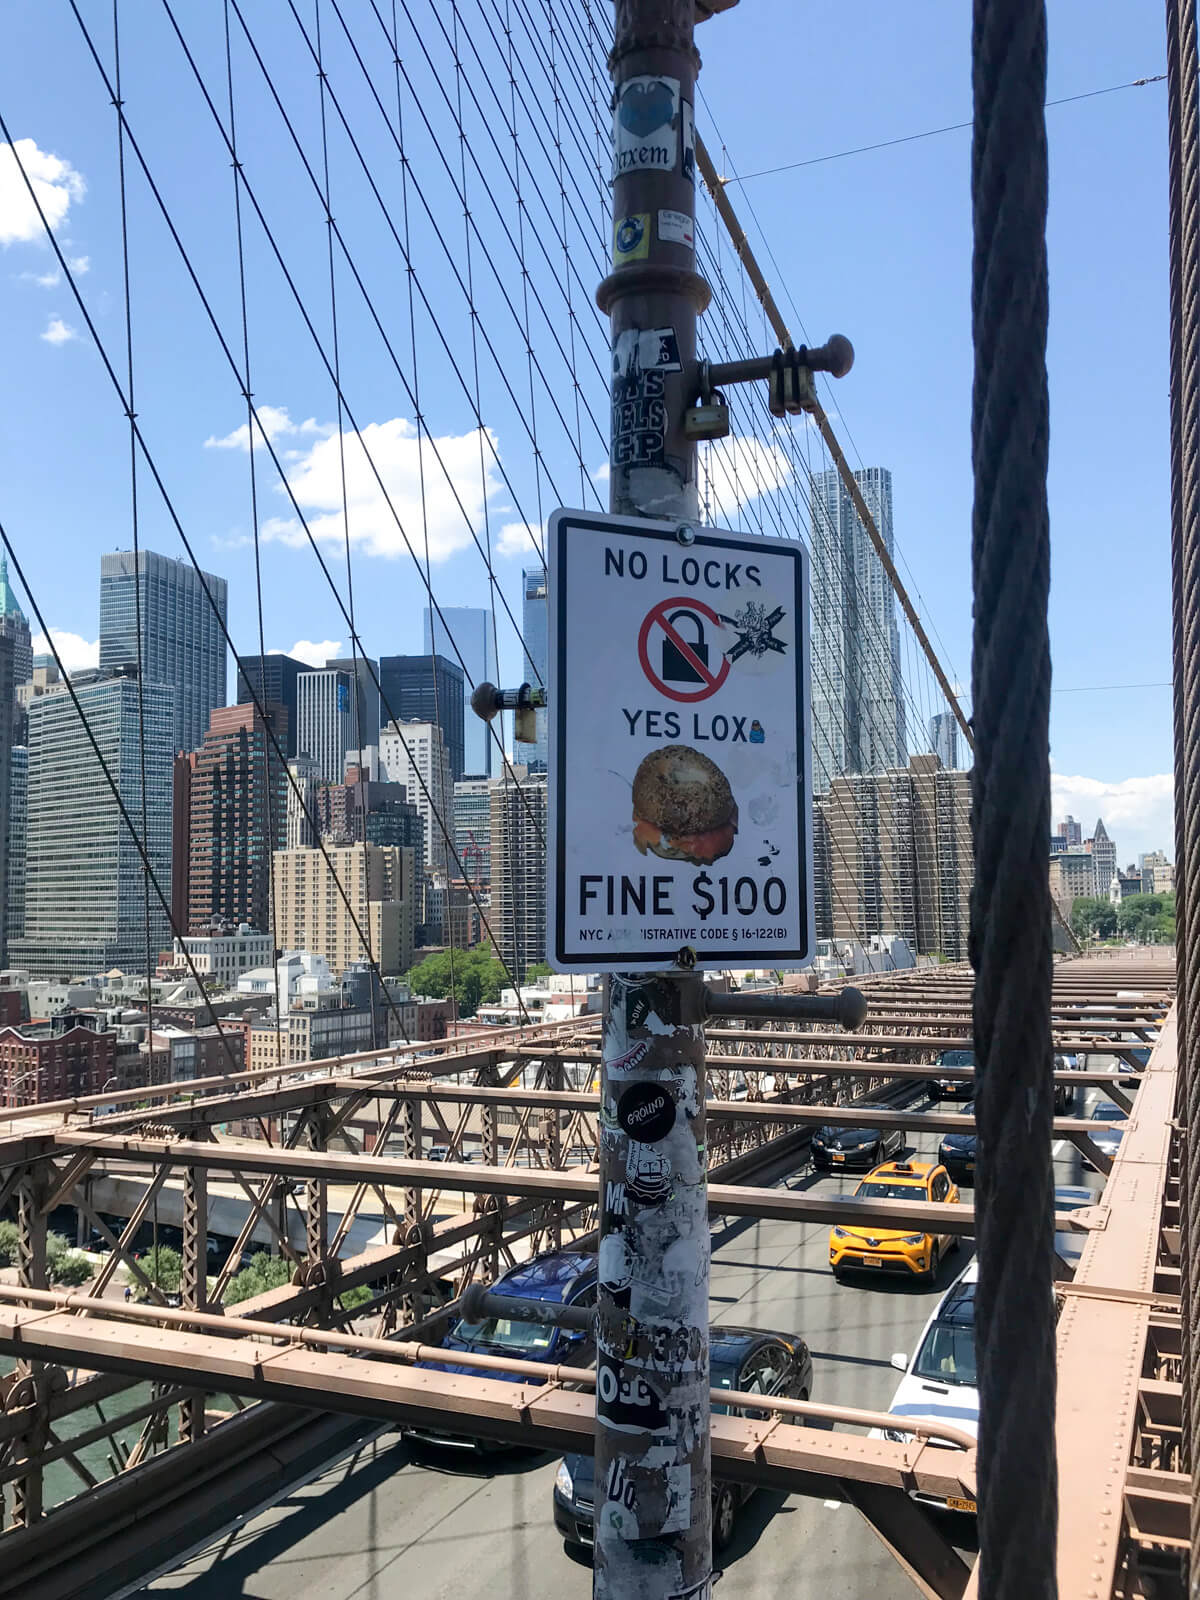 A sign on the structure of a bridge reading “NO LOCKS, YES LOX, FINE $100” showing an icon of a lock crossed out, and a burger with smoked salmon